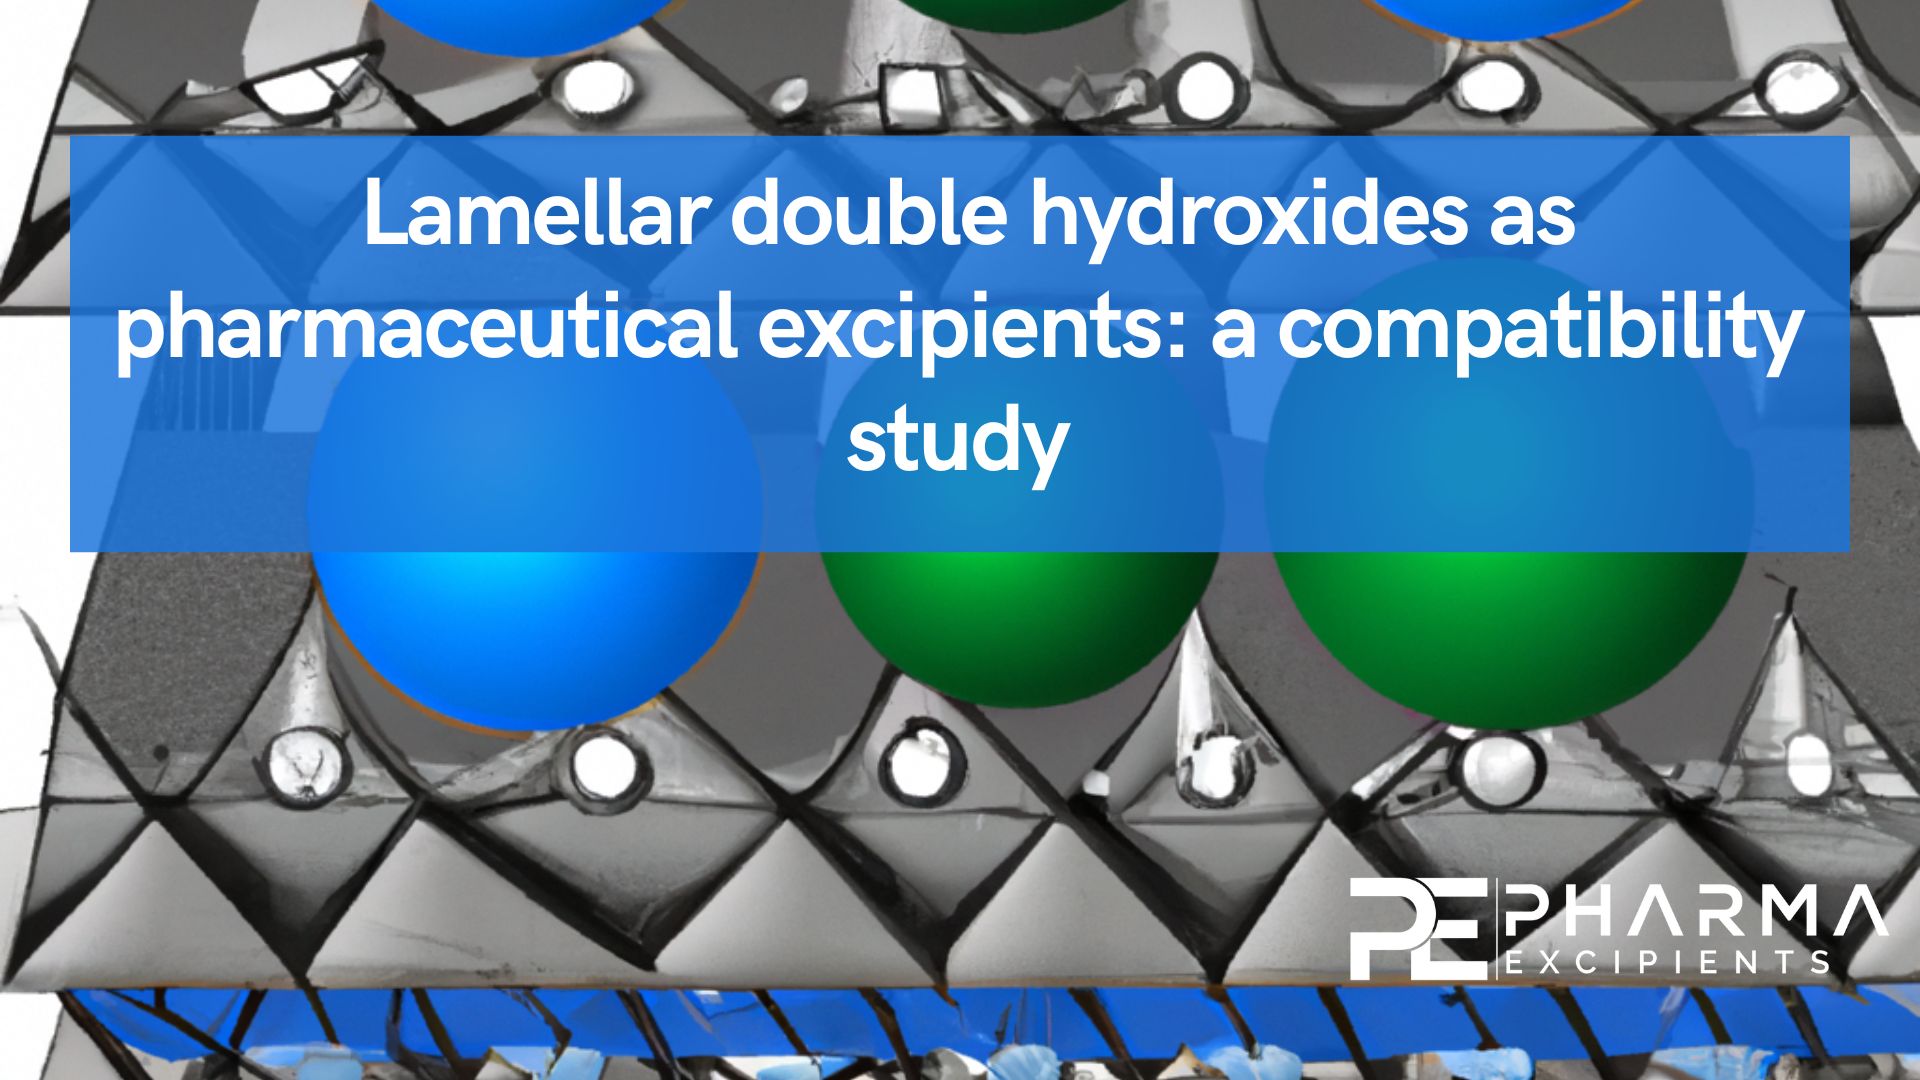 Lamellar double hydroxides as pharmaceutical excipients: a compatibility study